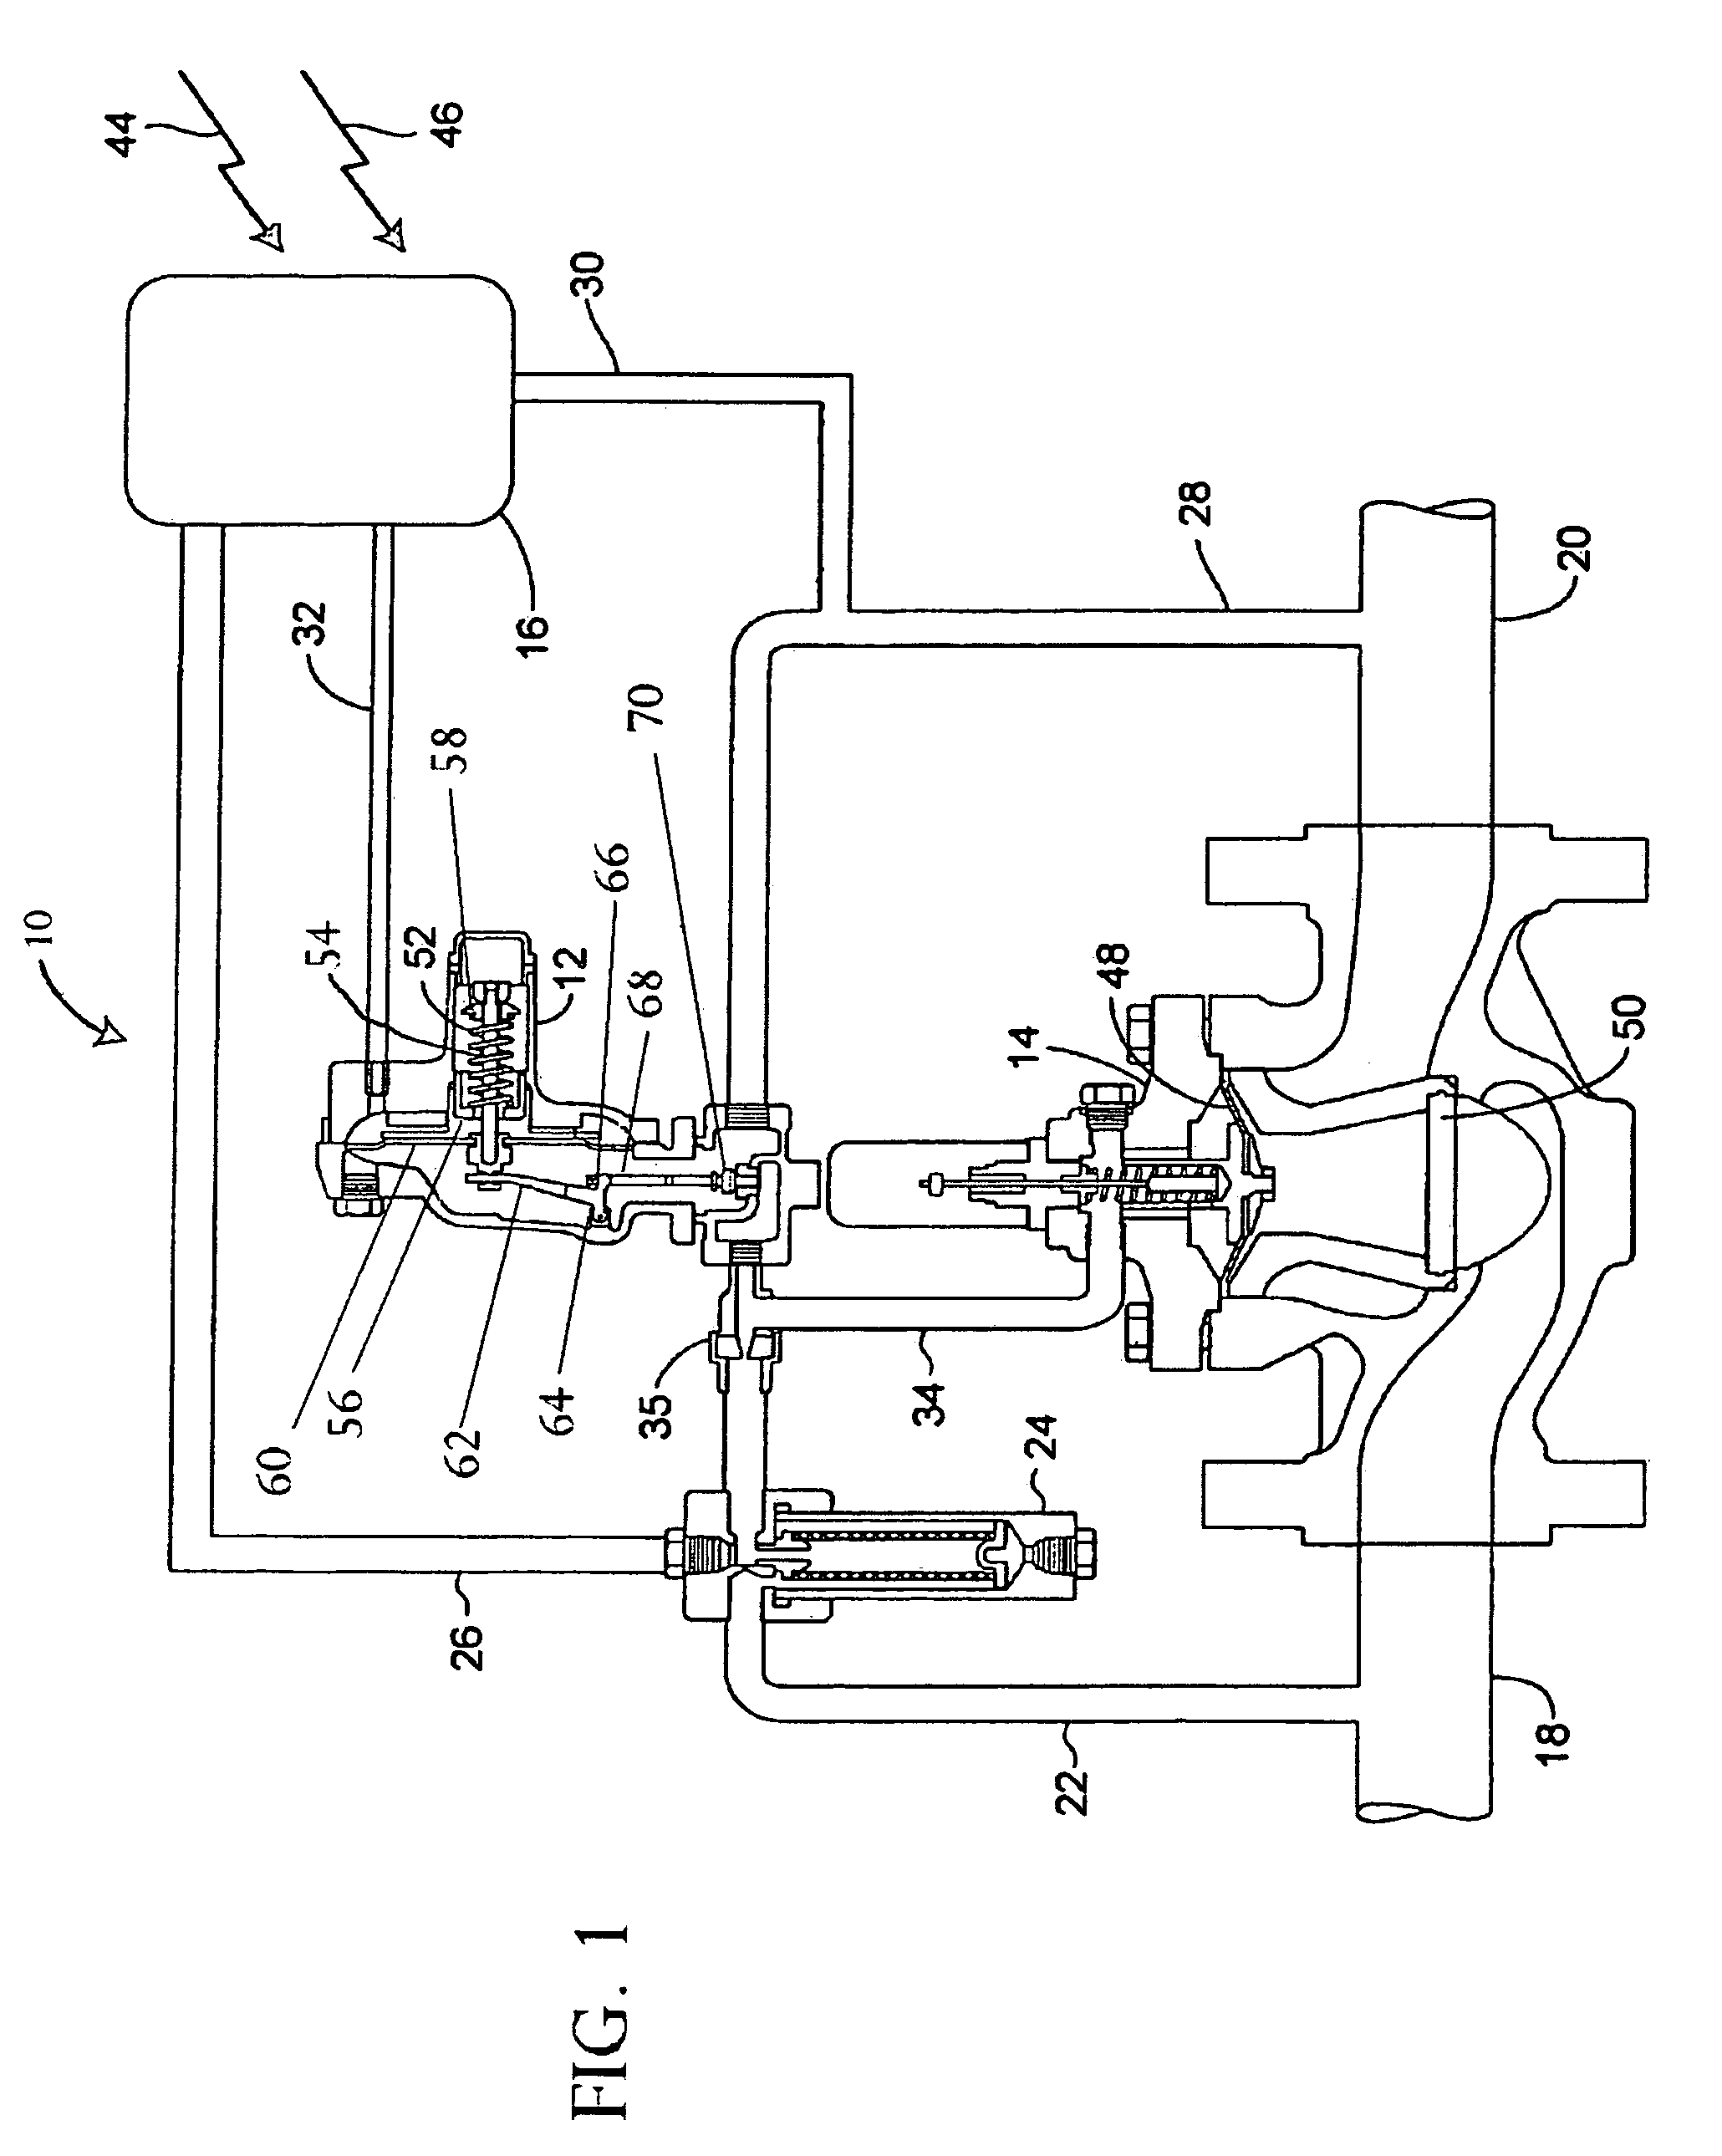 Pressure loaded pilot system and method for a regulator without atmospheric bleed